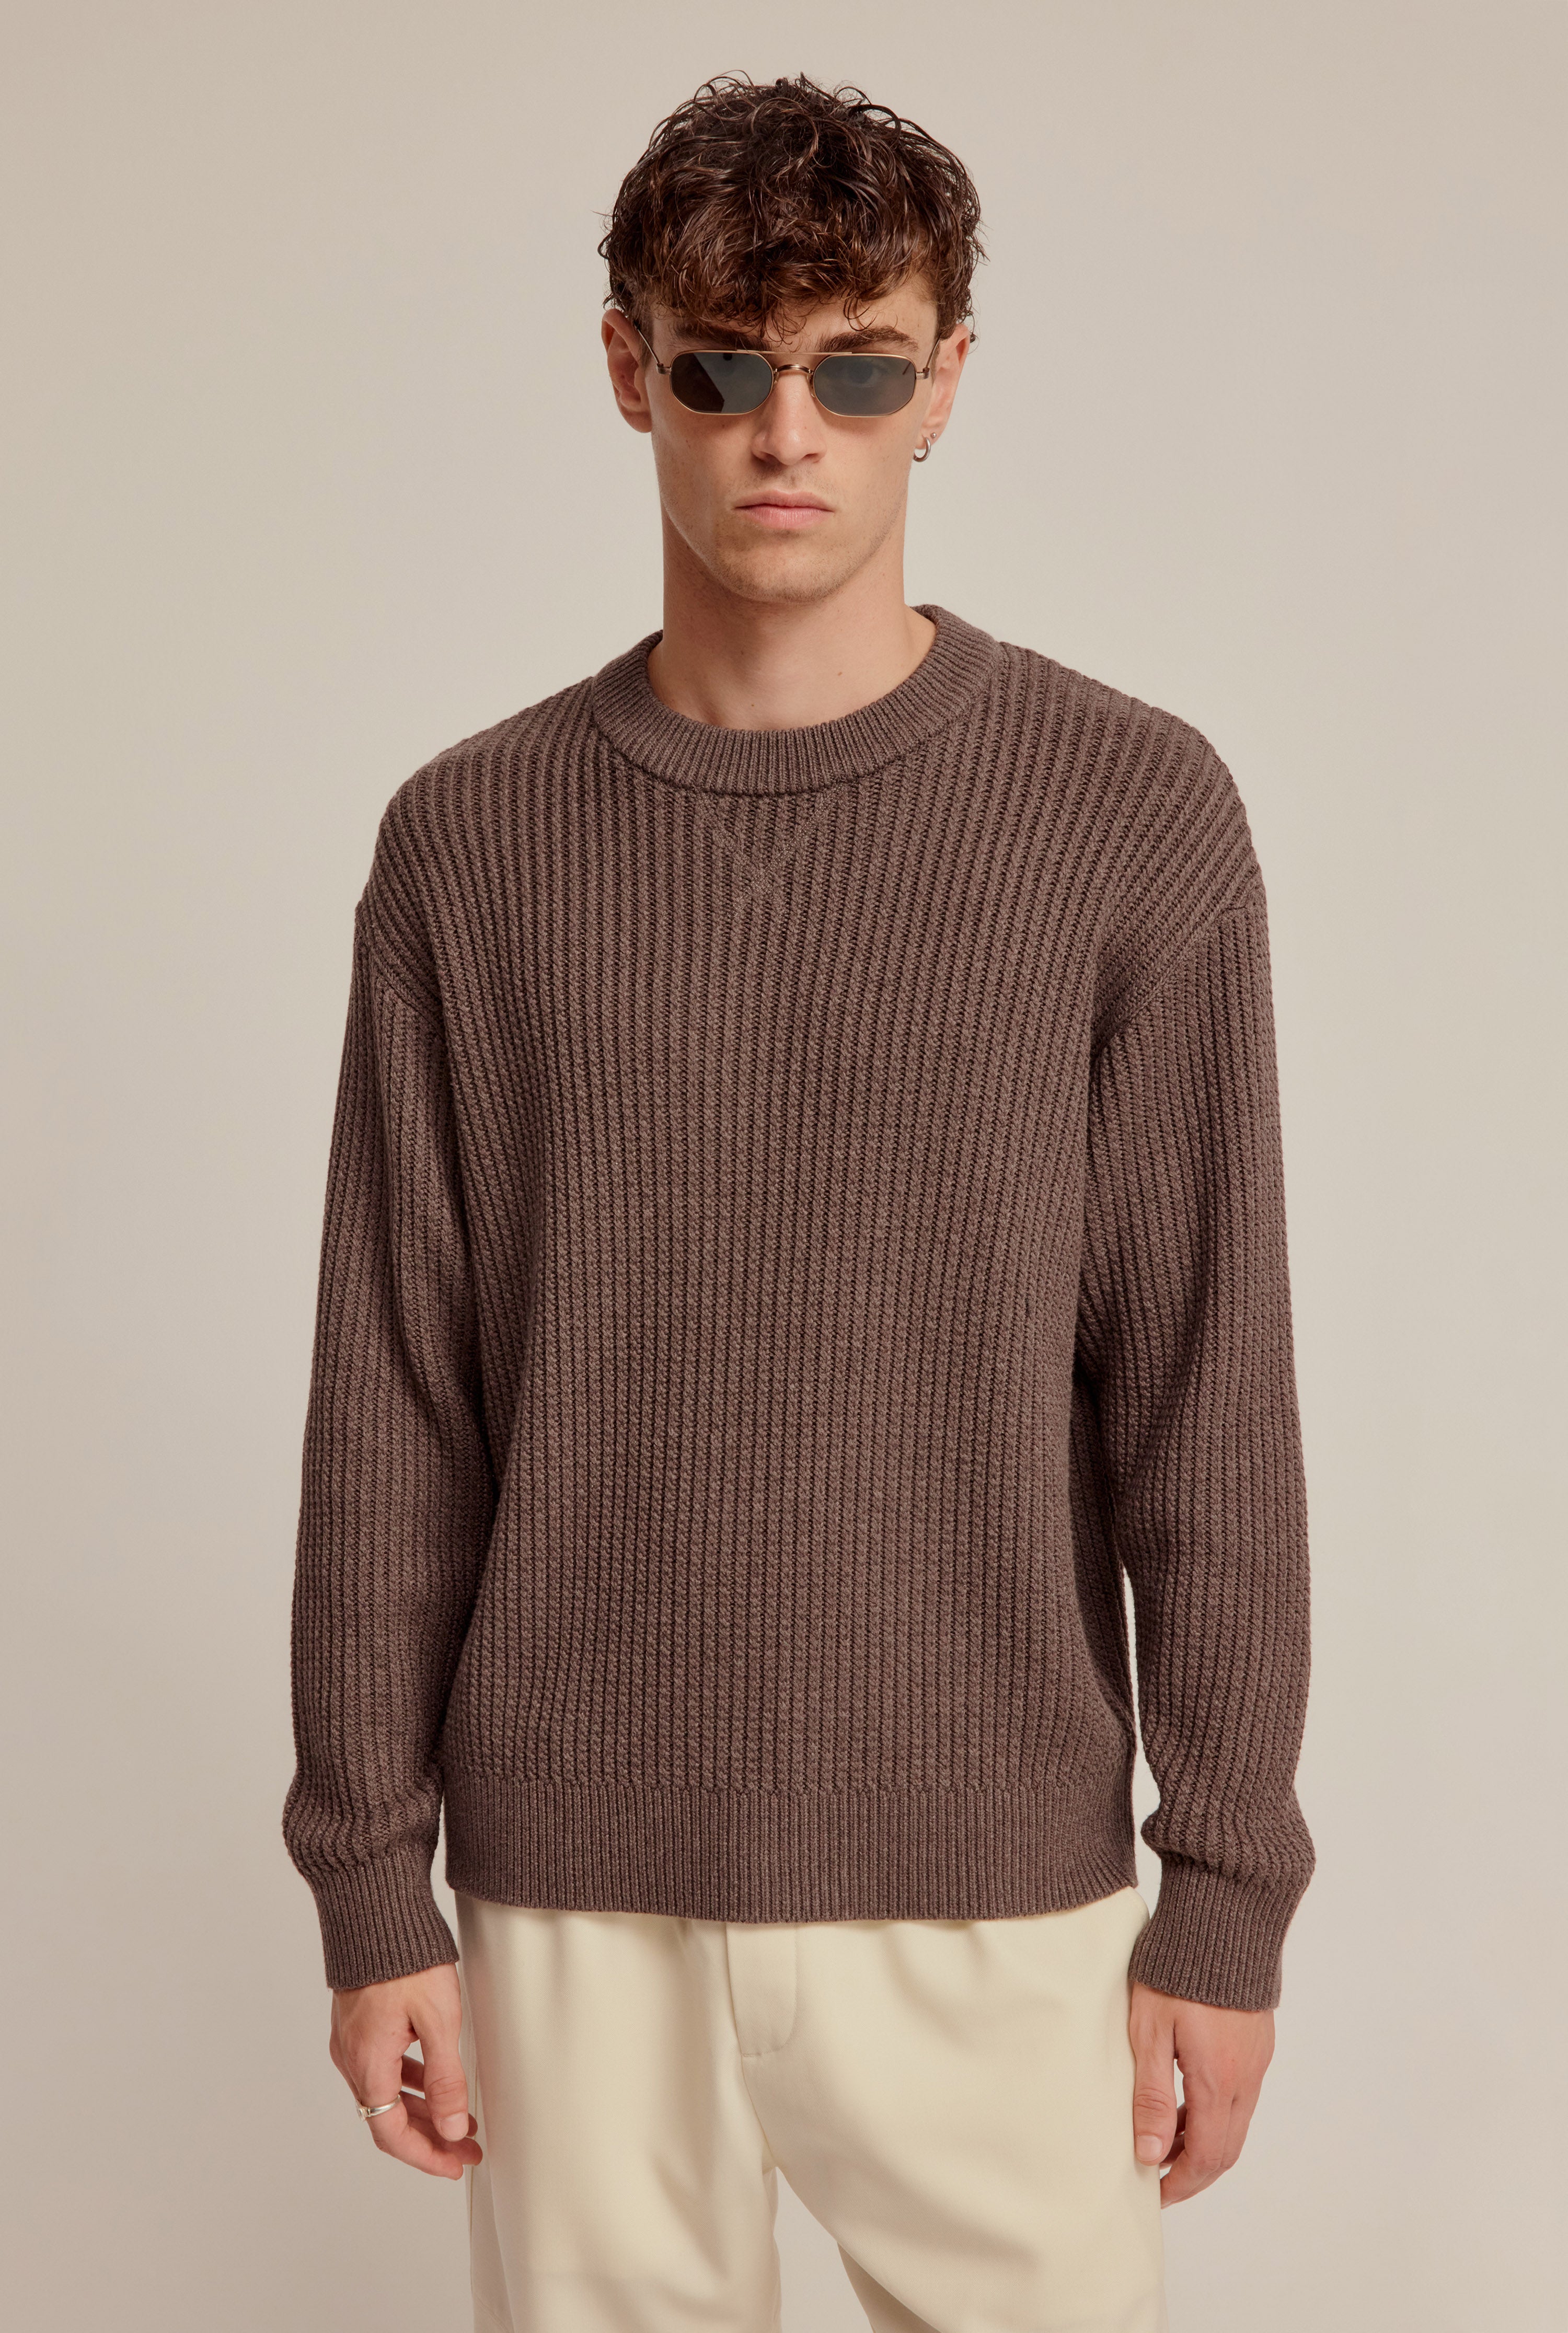 Cotton Rib Knitted Sweater - Brown Marl